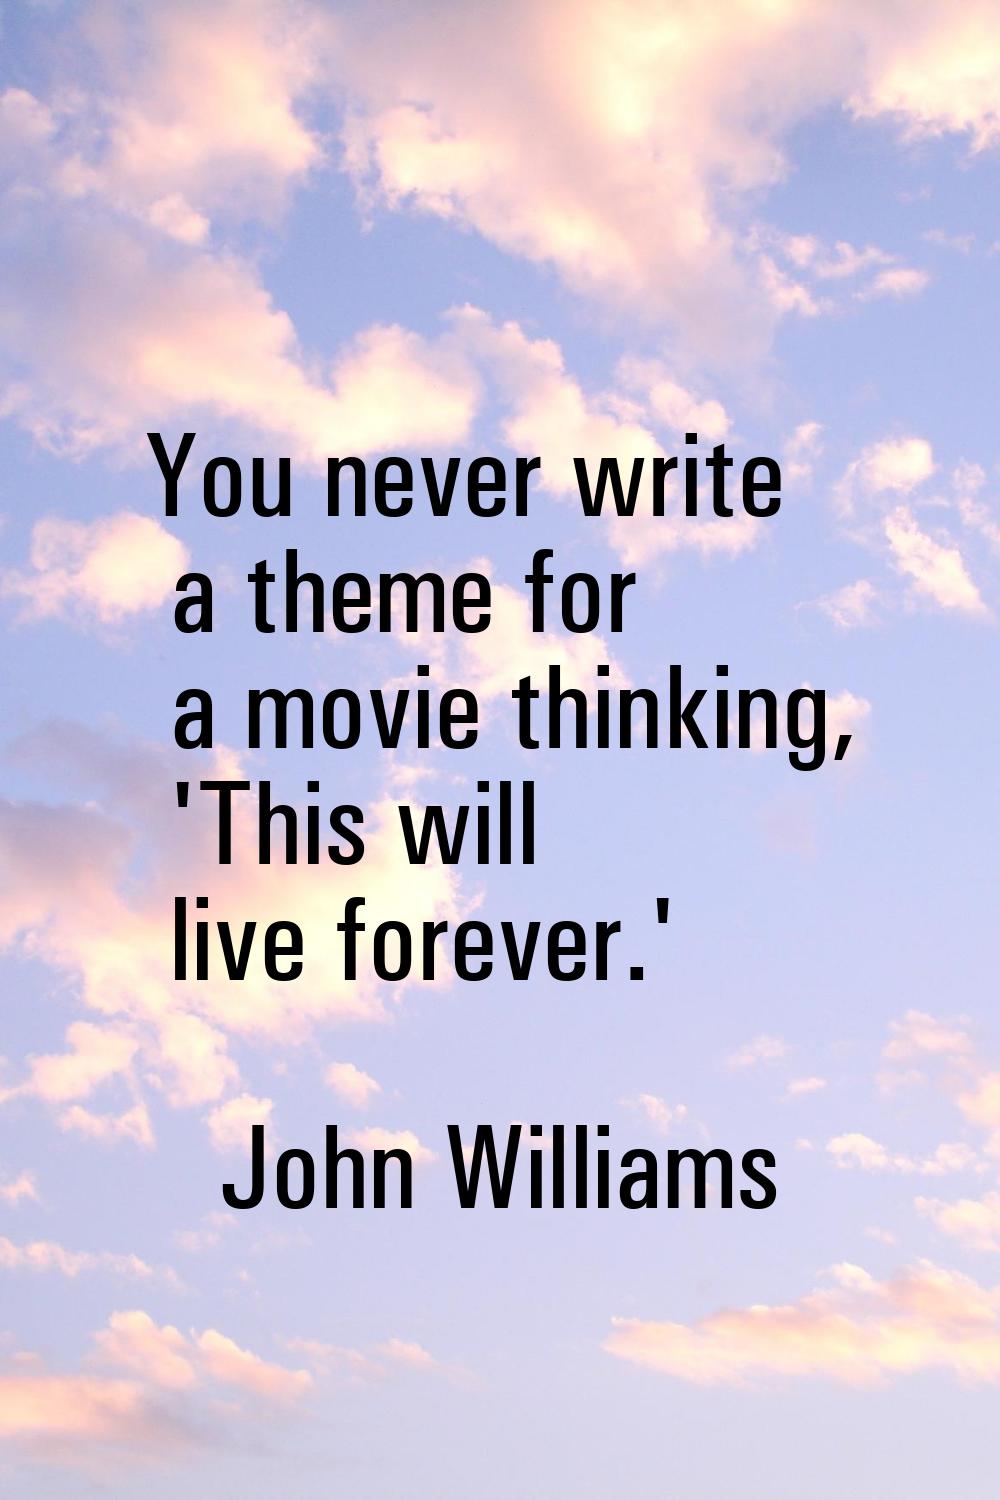 You never write a theme for a movie thinking, 'This will live forever.'